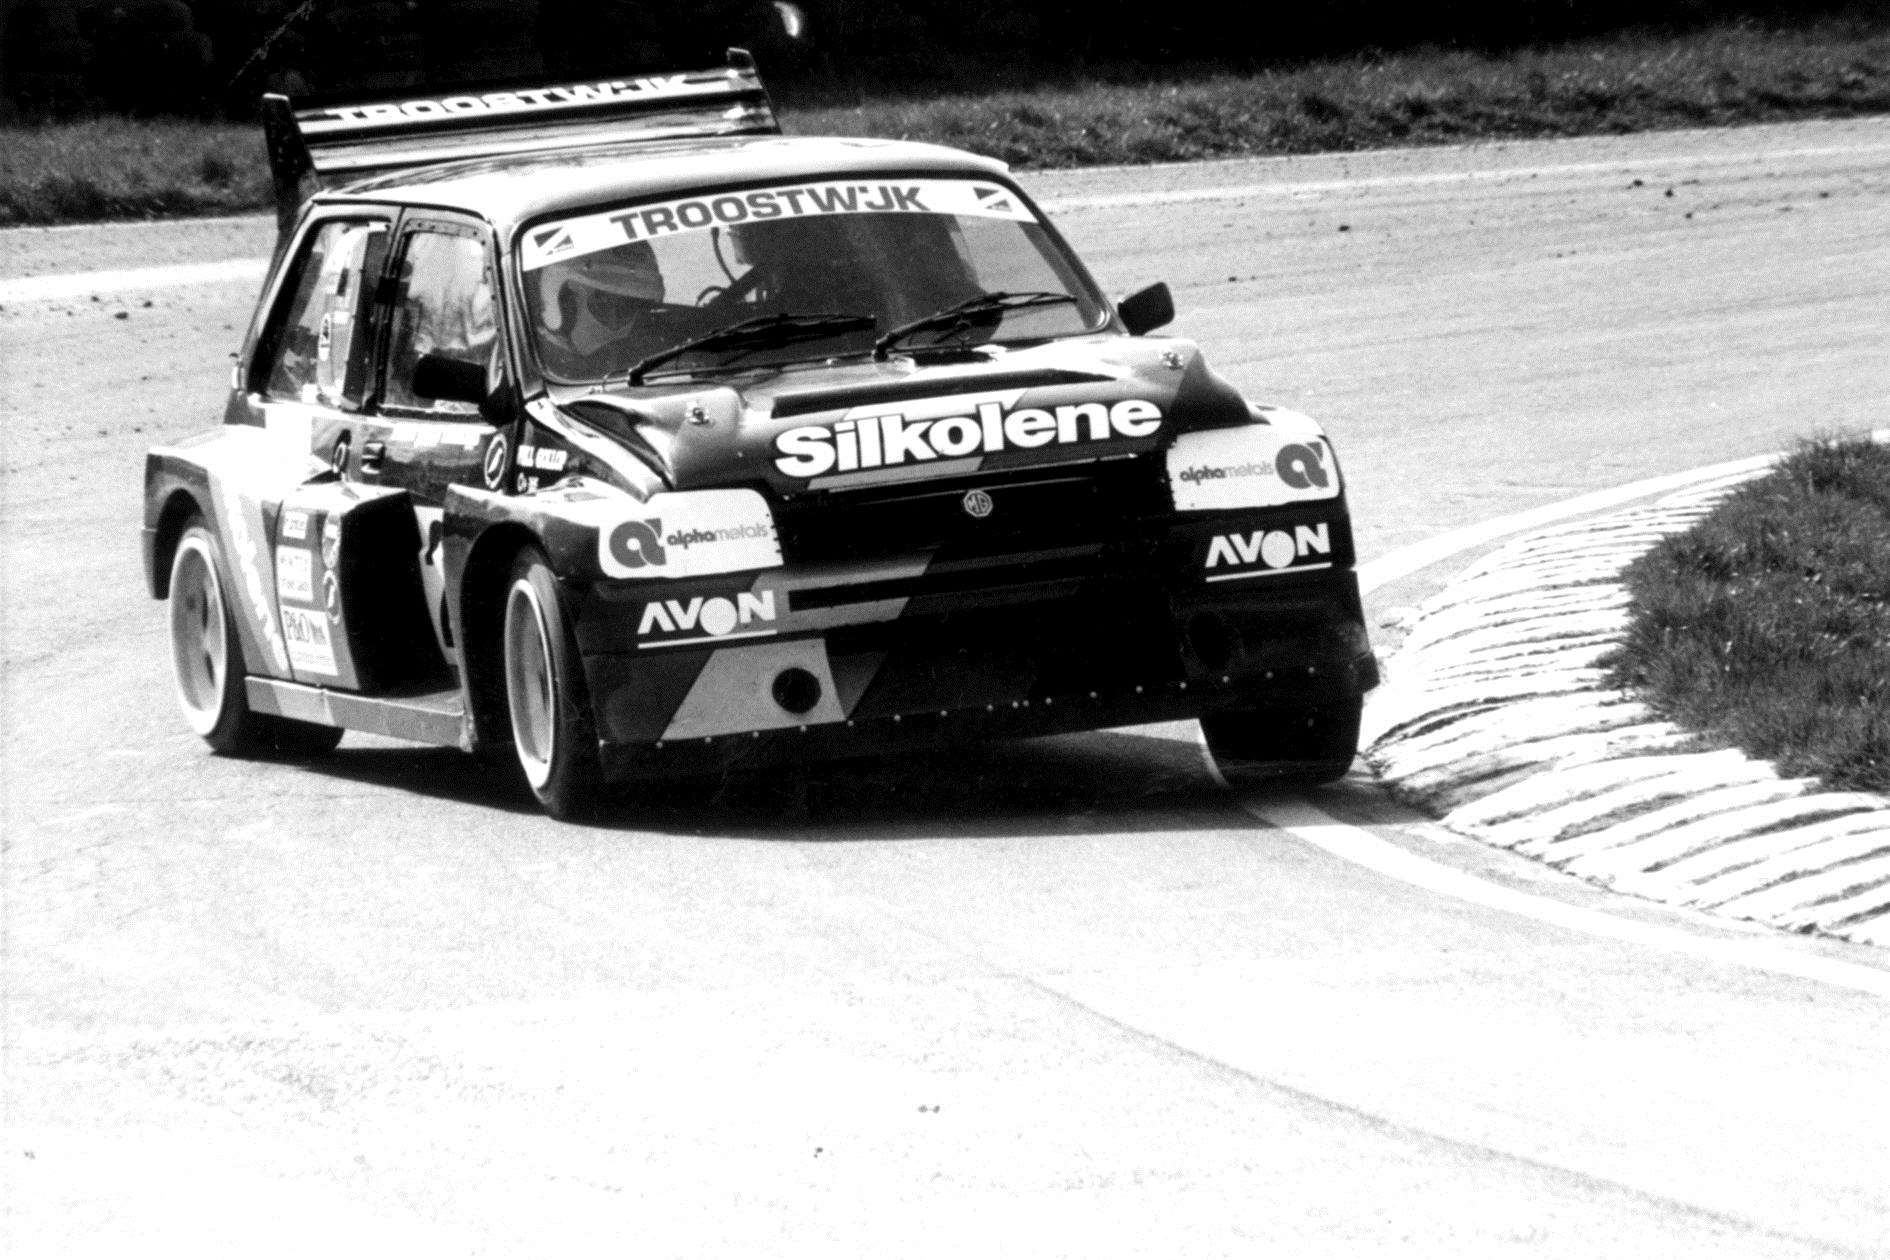 Gollop in action in his MG Metro 6R4. Picture: Tim Whittington